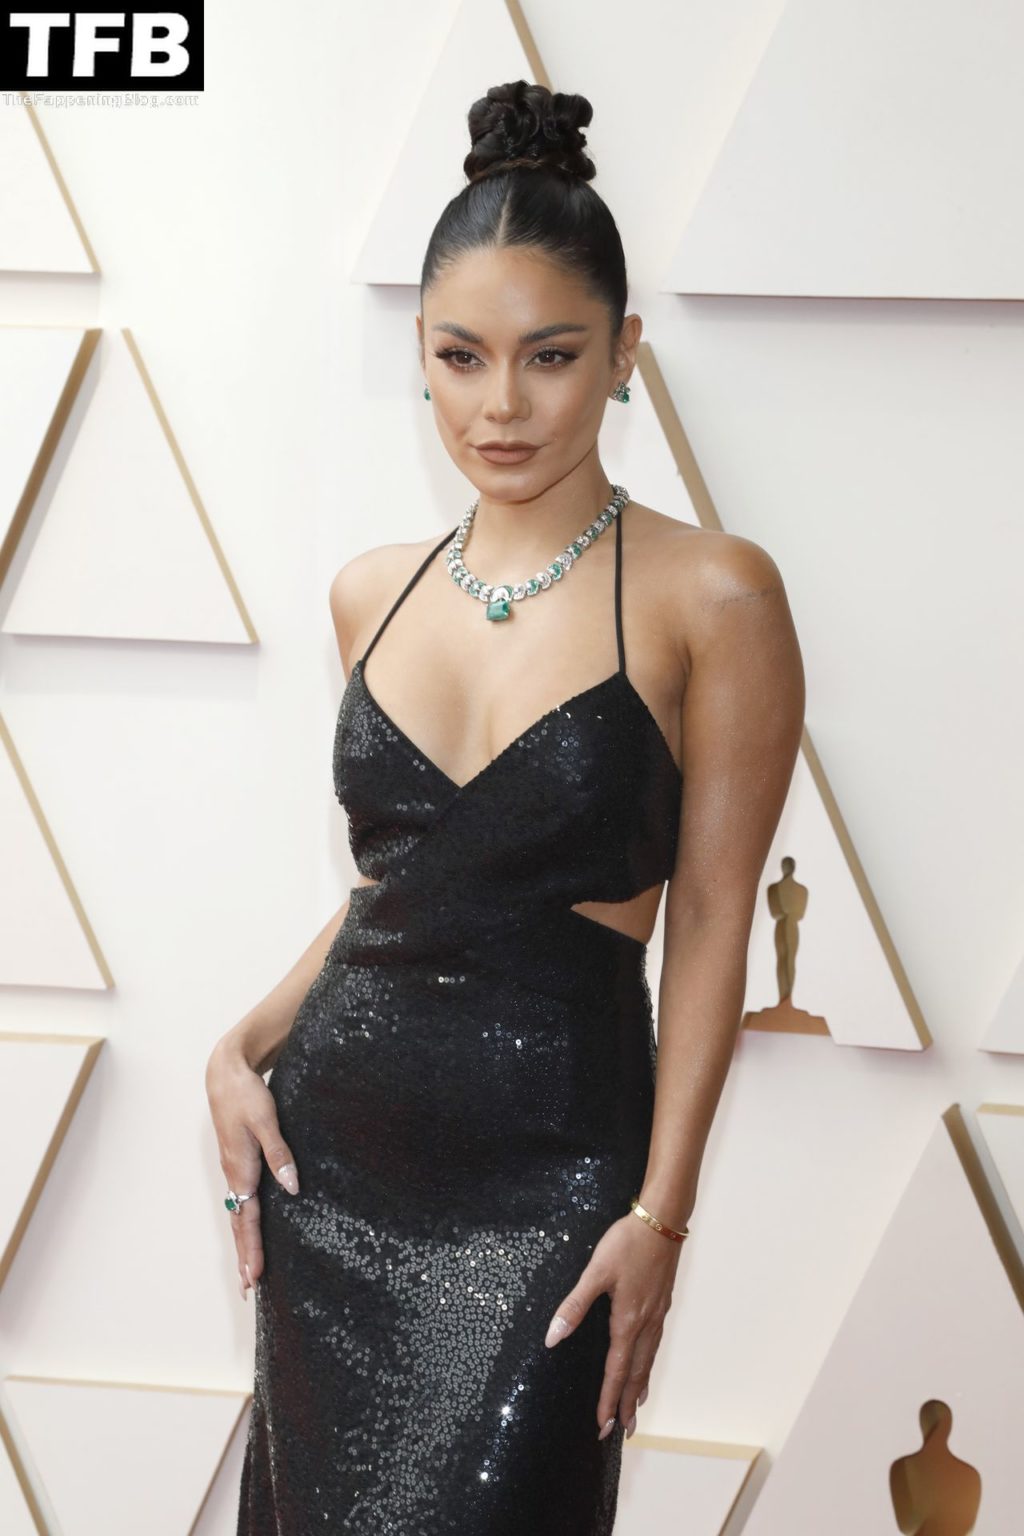 Vanessa Hudgens Sexy The Fappening Blog 73 2 1024x1536 - Vanessa Hudgens Poses on the Red Carpet at the 94th Annual Academy Awards (83 Photos)